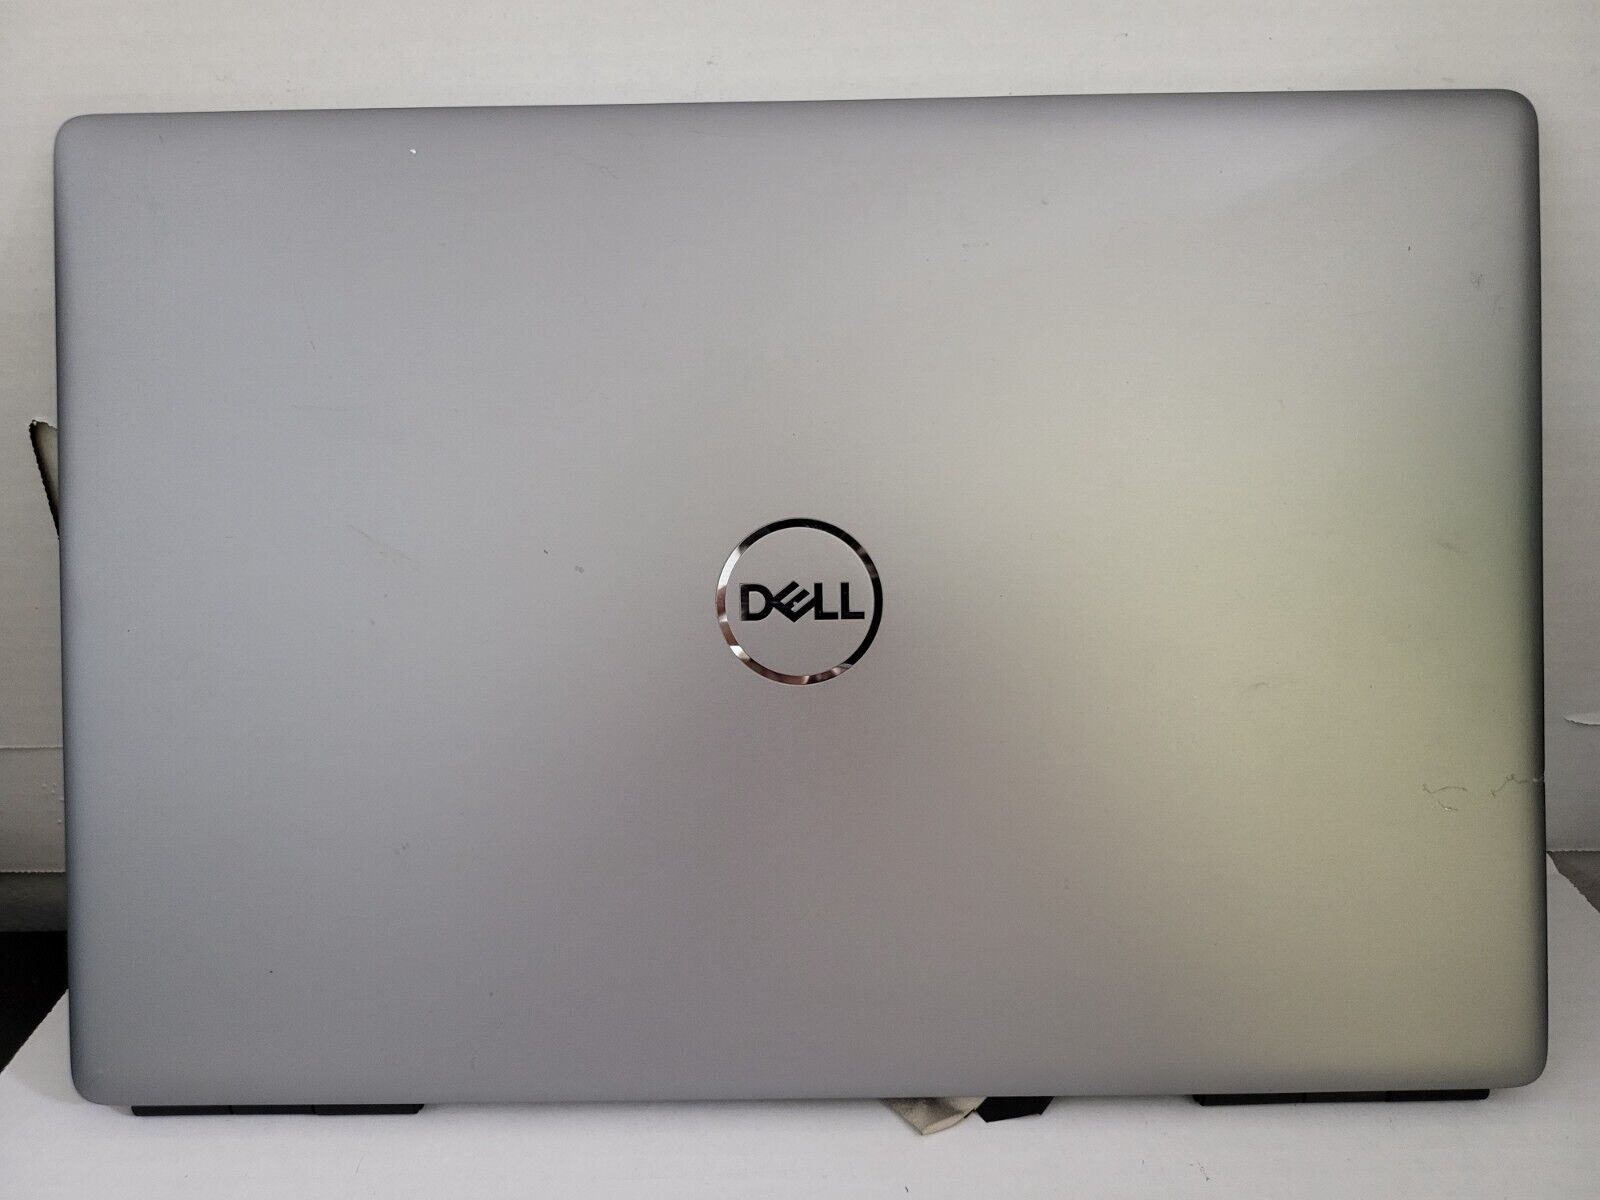 GENUINE Dell Precision 7550 M7550 Laptop LCD Back Cover Lid W/ Hinges P9C34 B